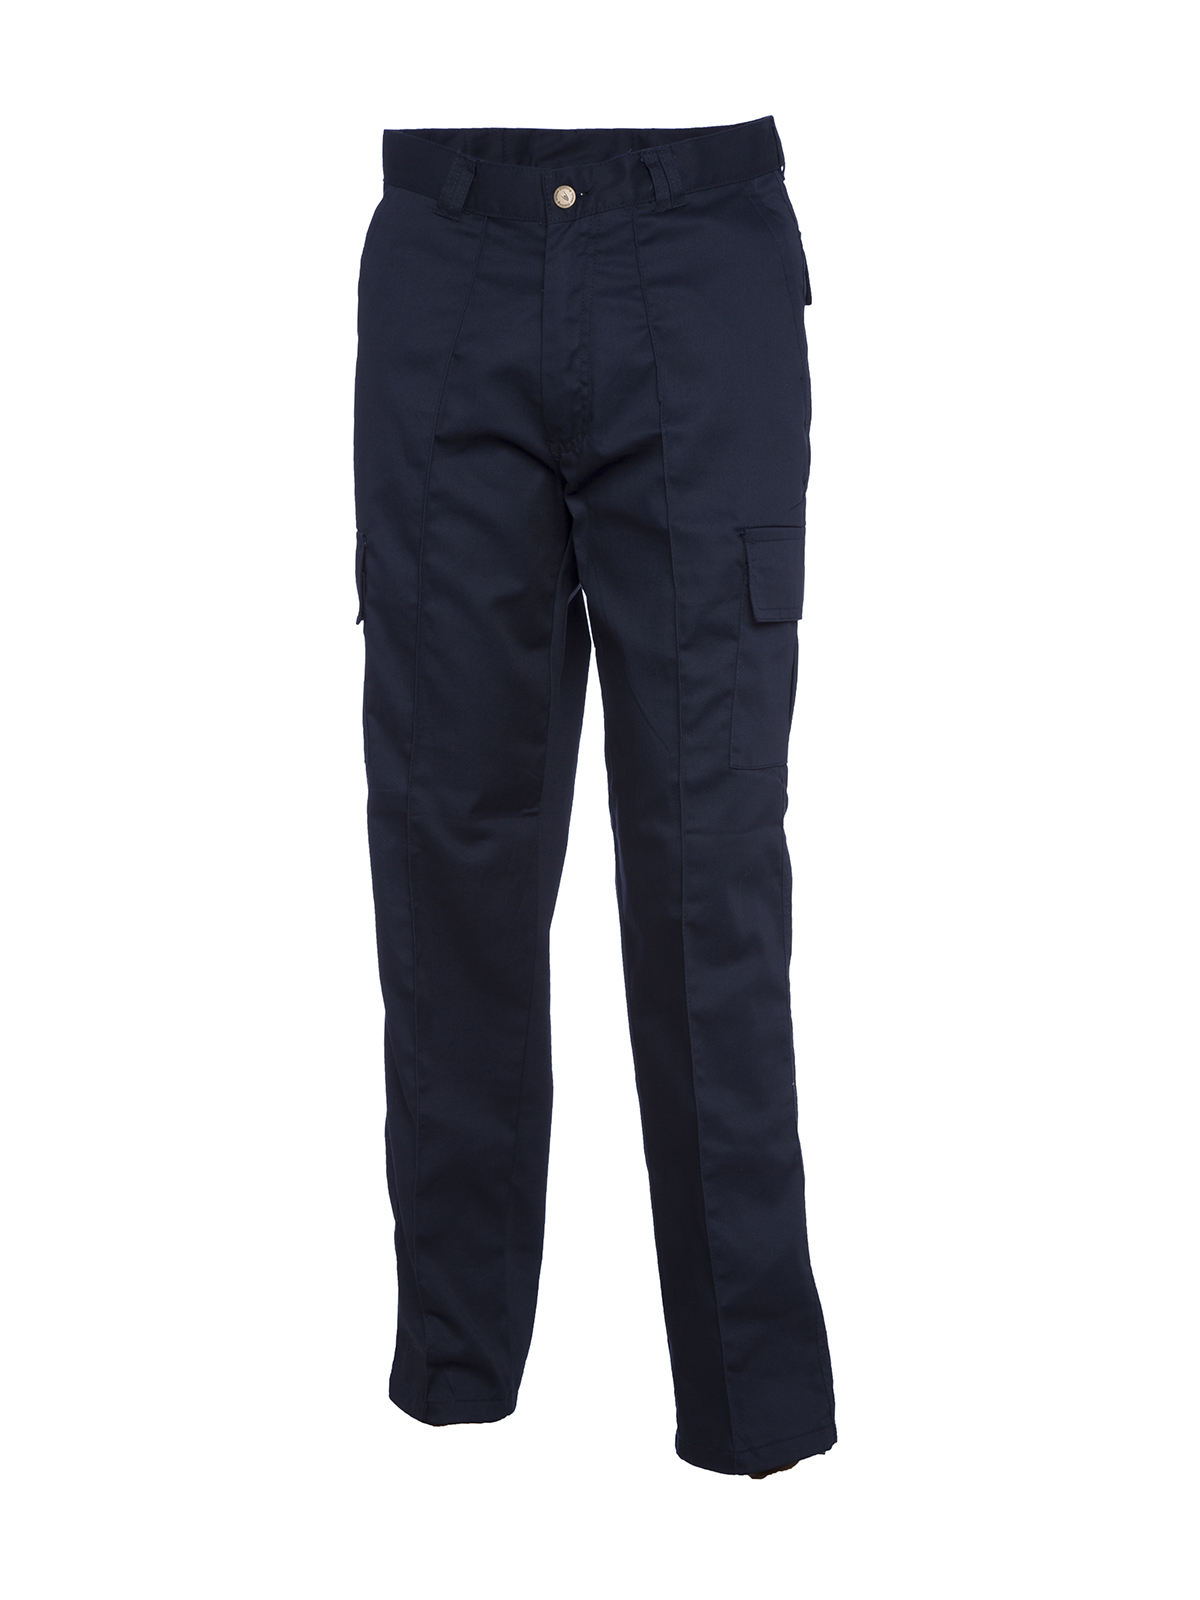 Cargo Trousers, Navy Blue - 42L